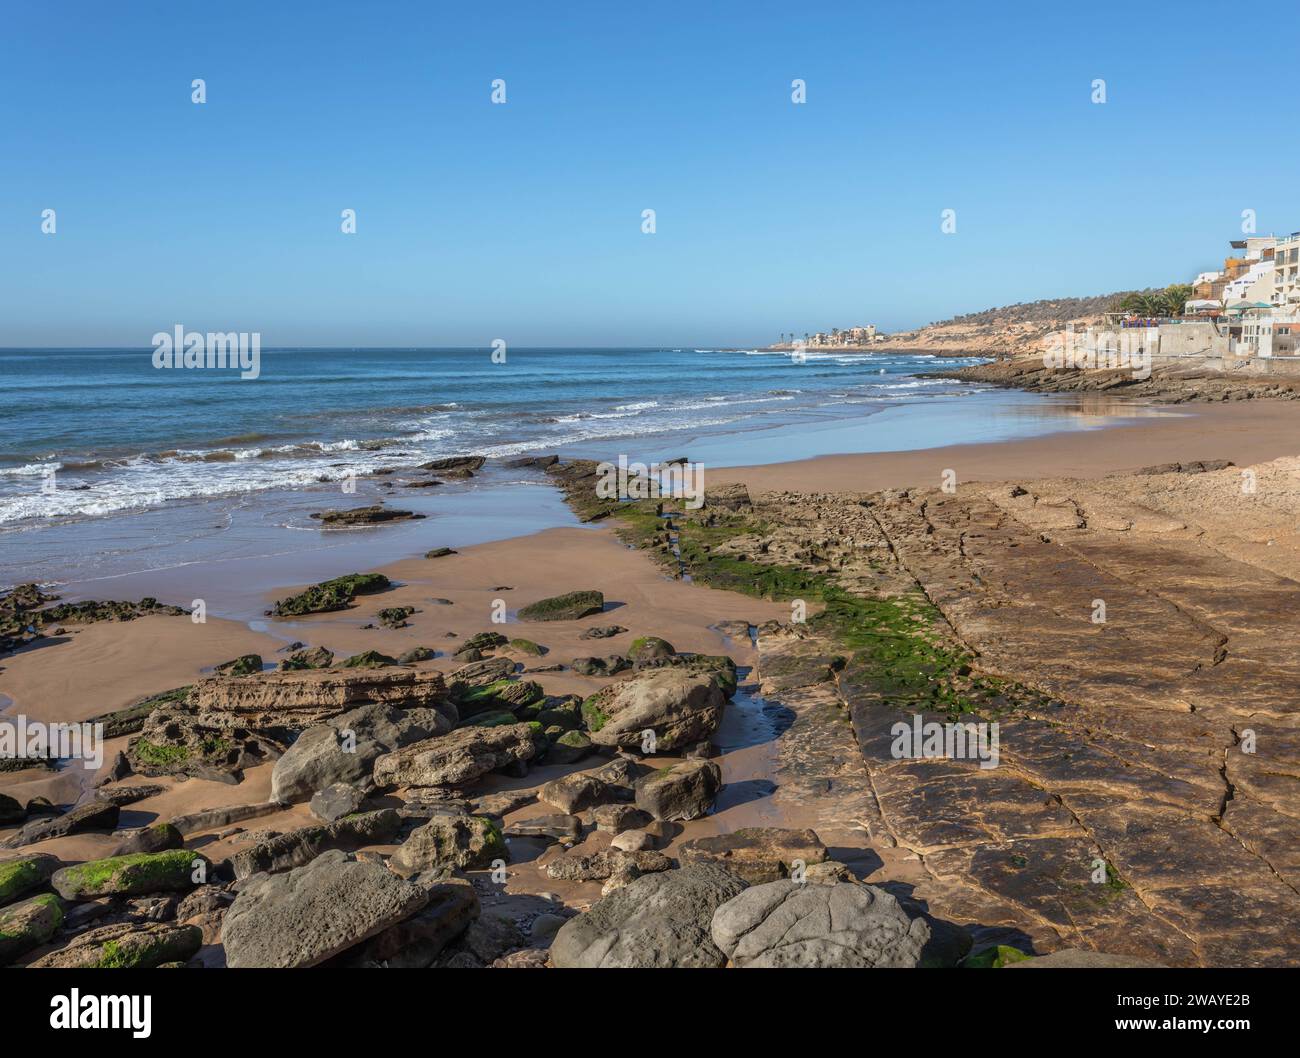 A wide-angle view of a bay in Taghazout, near Agadir, with sandy and rocky beach overlooking the Atlantic Ocean Stock Photo